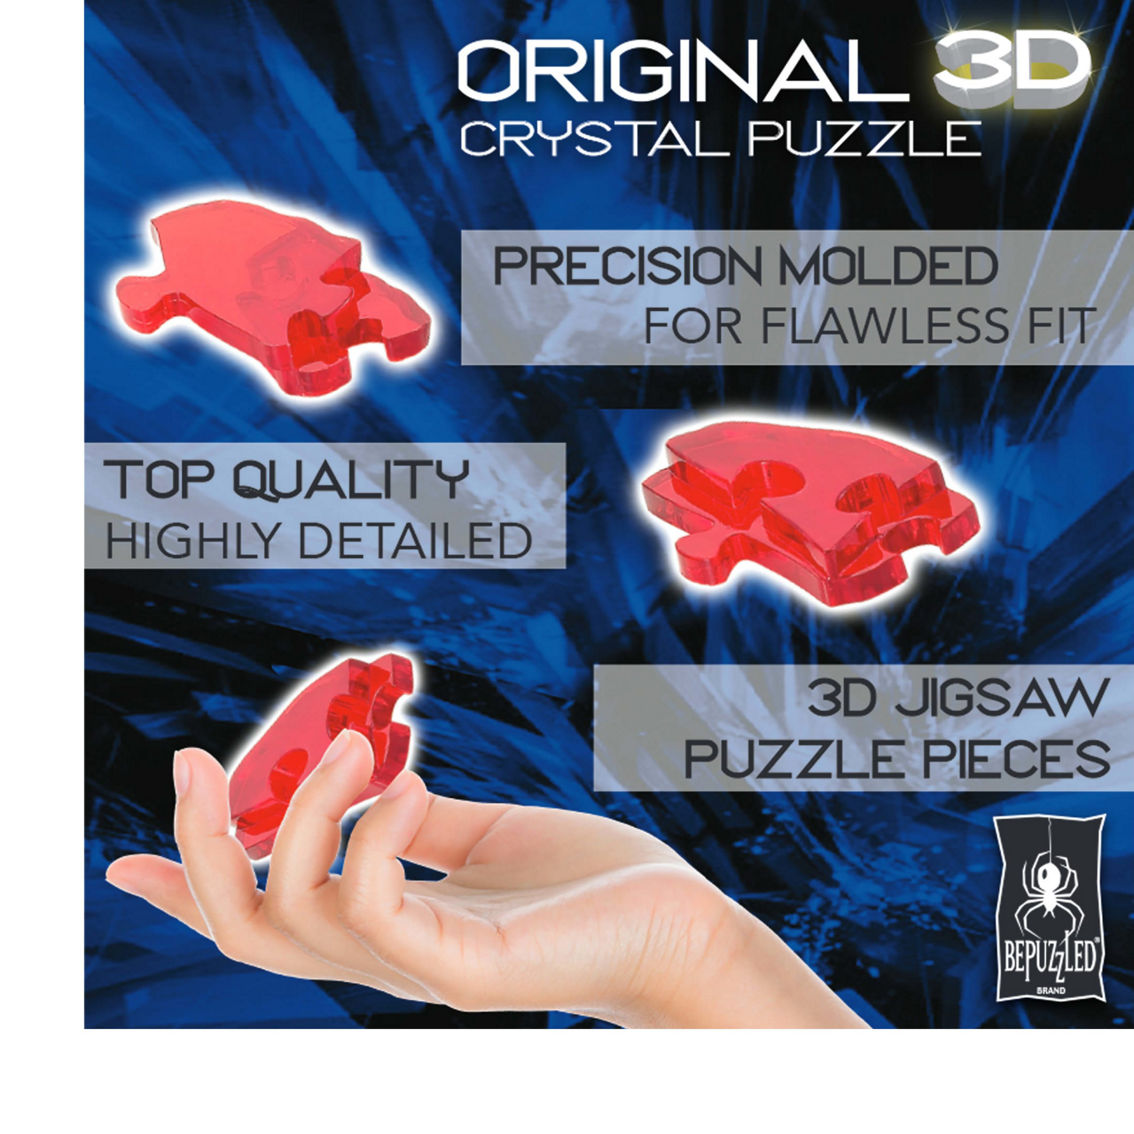 BePuzzled 3D Crystal Puzzle - Disney Mickey Mouse (Multi-Color): 36 Pcs - Image 5 of 5